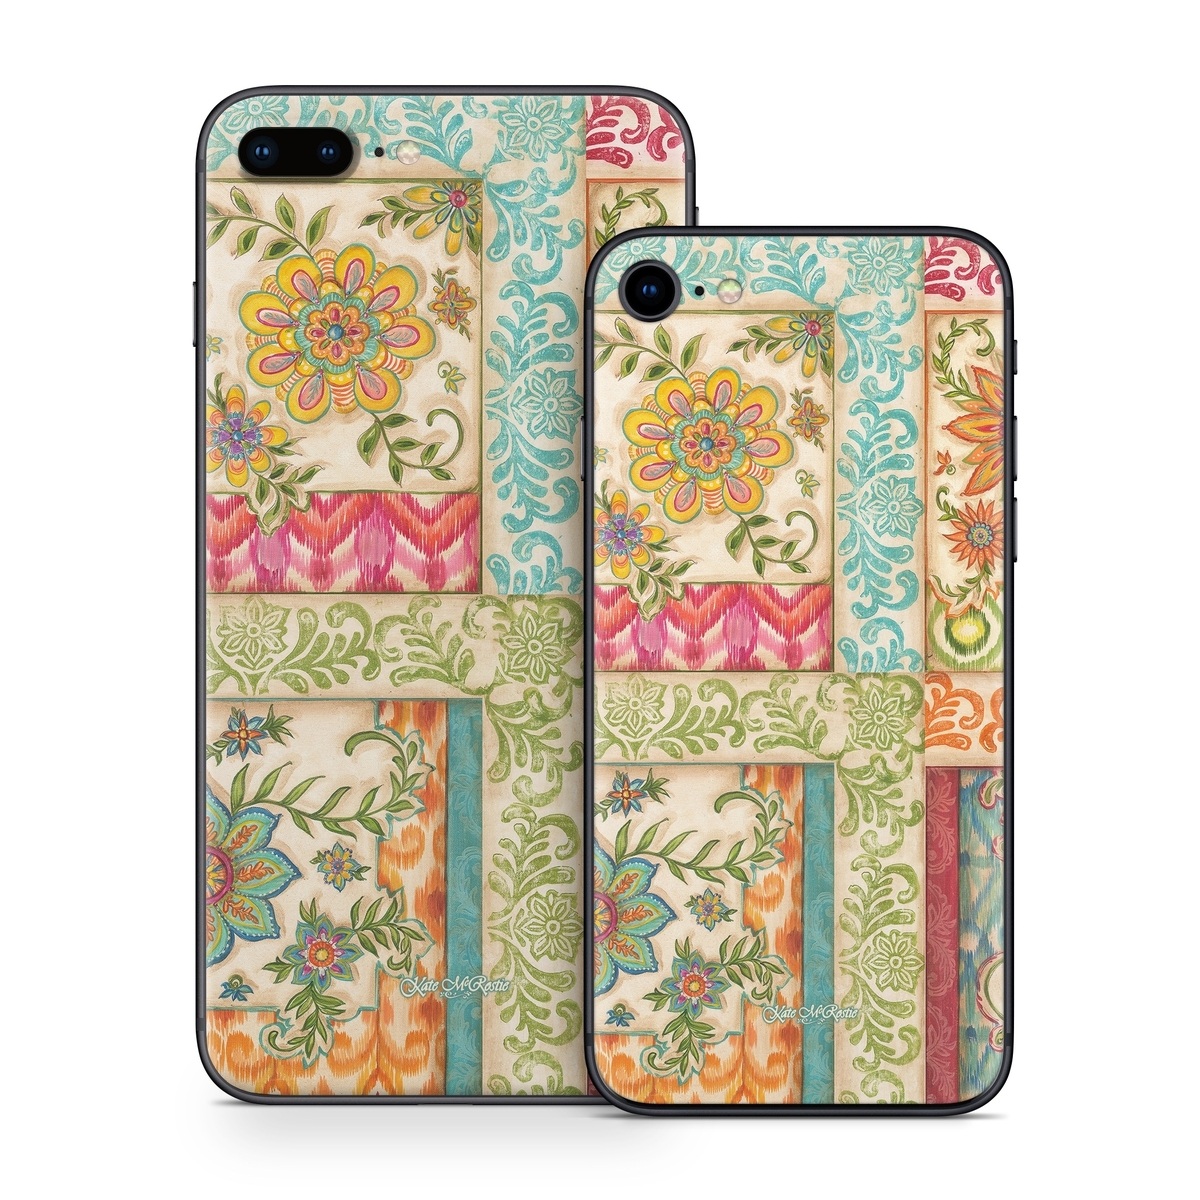 iPhone 8 Series Skin design of Flower, Rectangle, Plant, Botany, Textile, Aqua, Art, Pattern, Symmetry, Motif, with red, orange, green, blue, pink, yellow colors